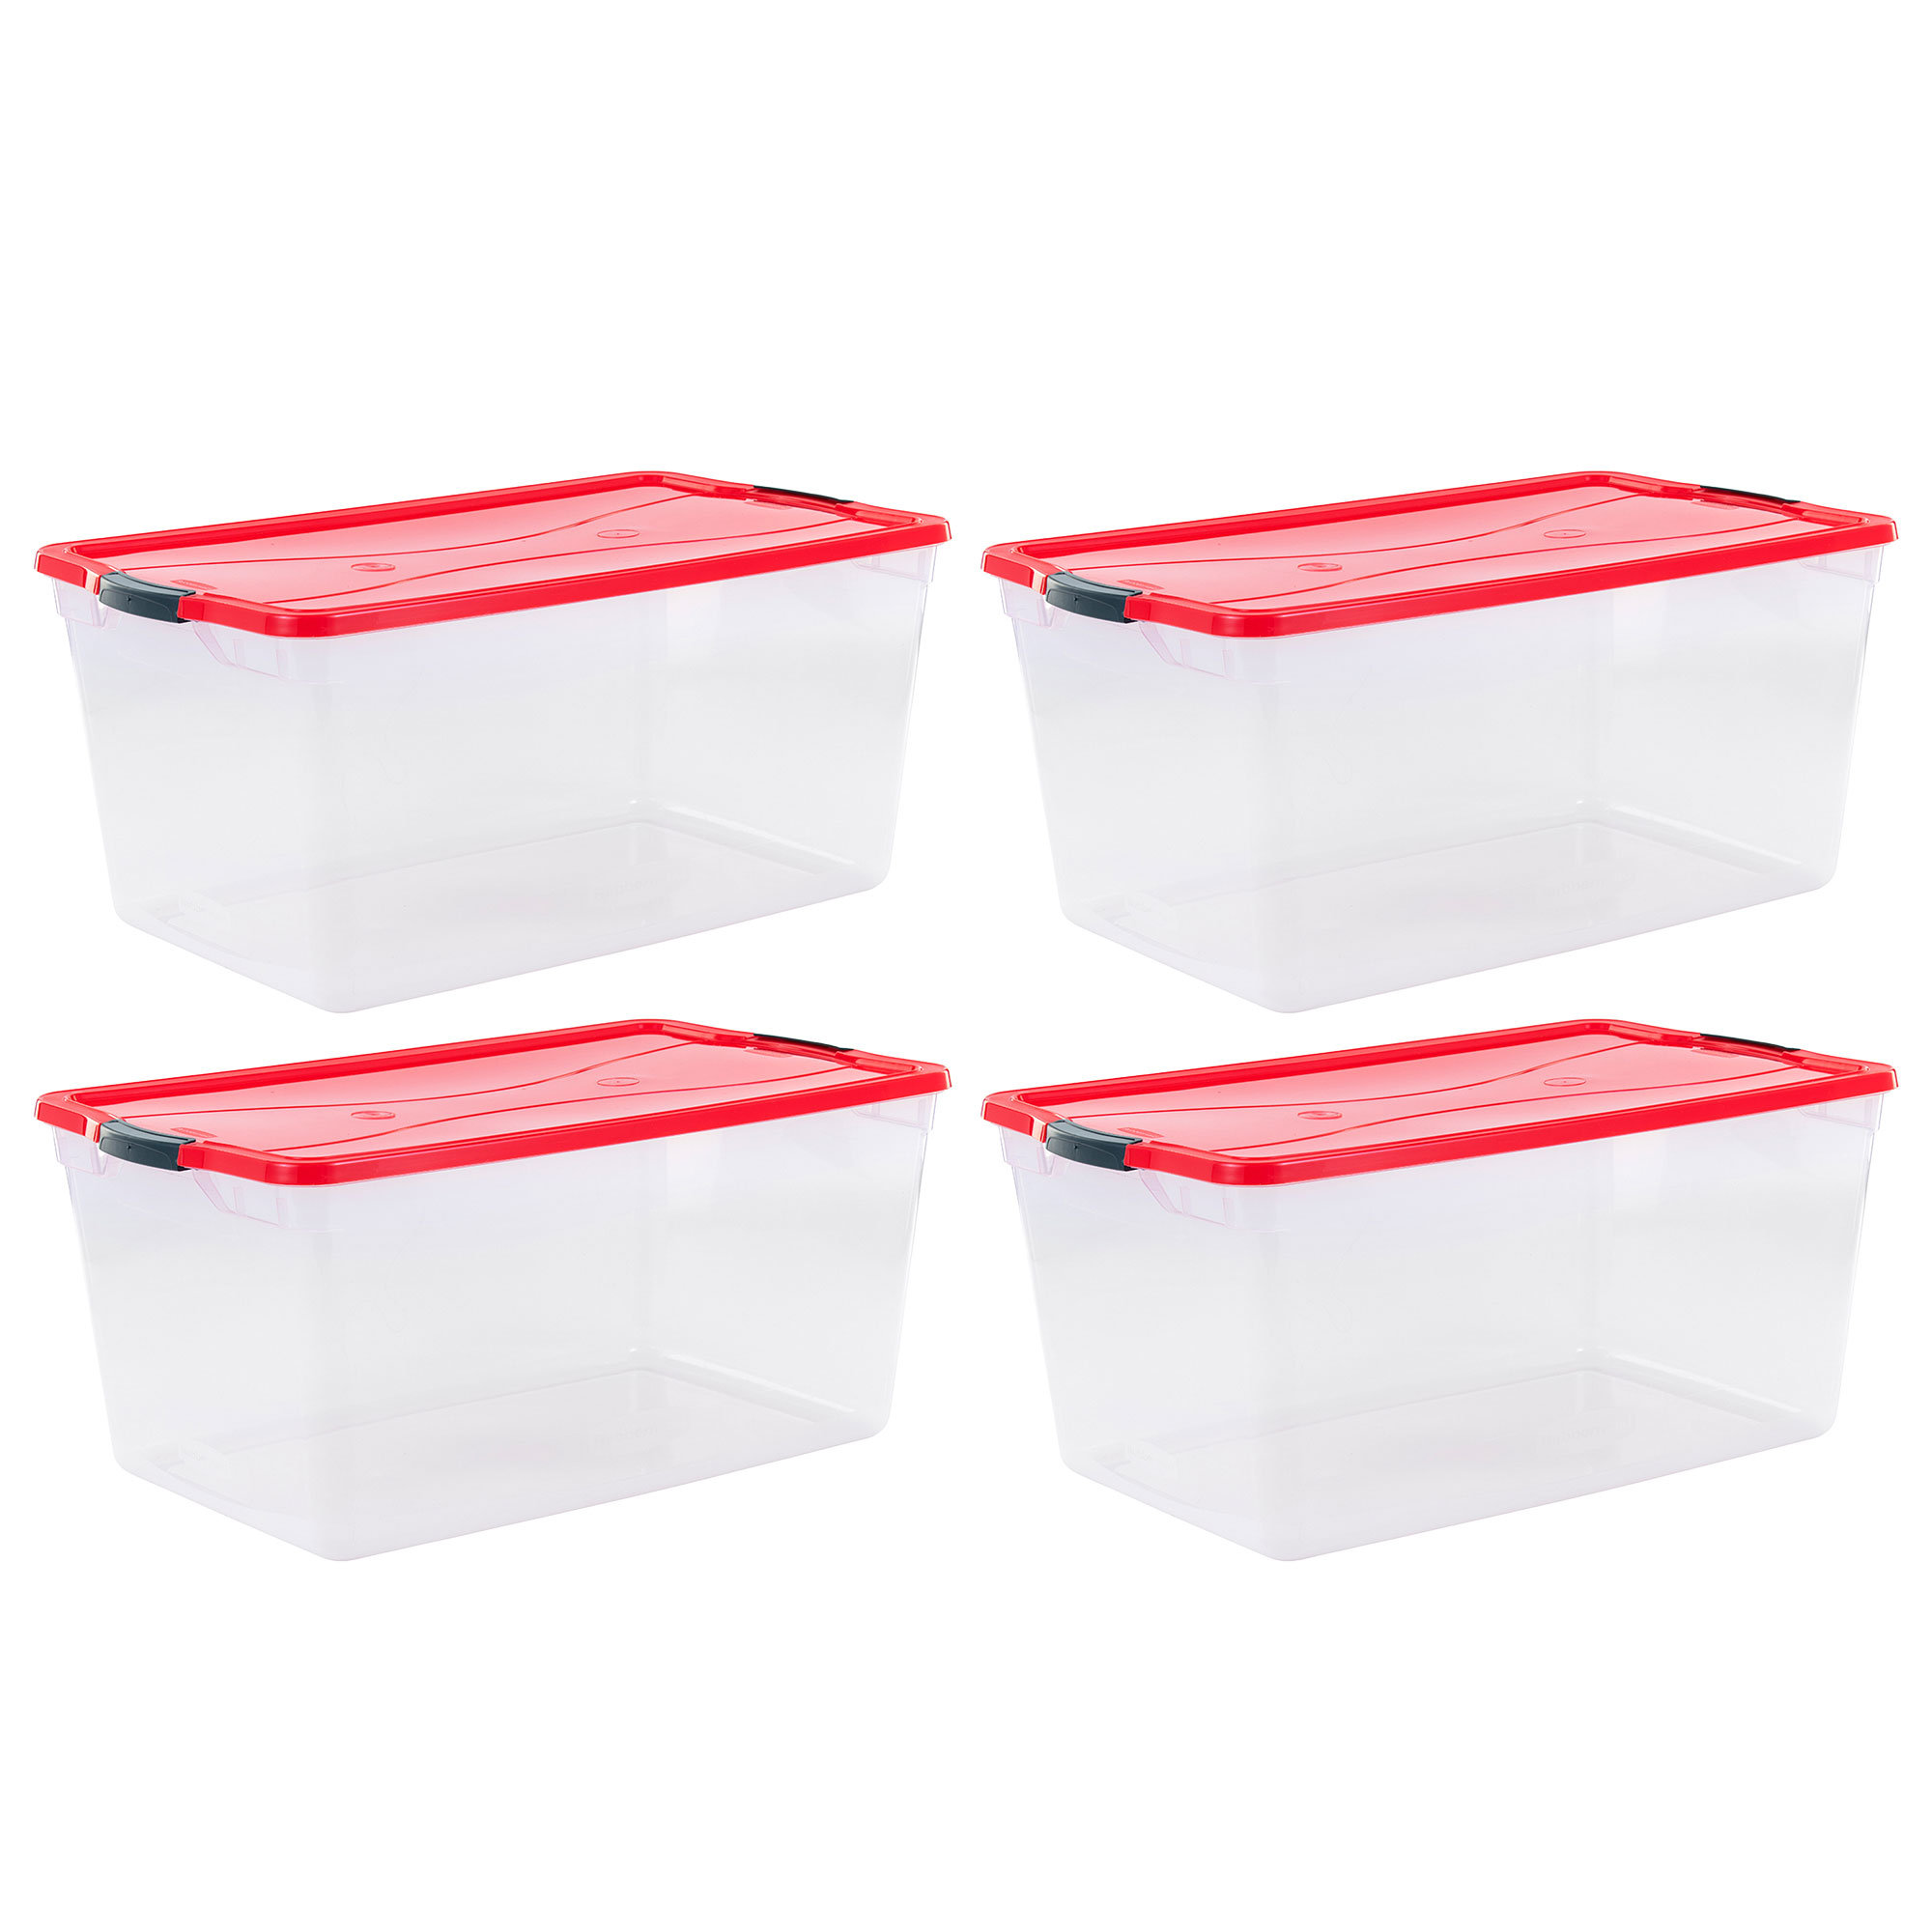 Rubbermaid 41 qt. Cleverstore Latching Stackable Storage Tote, Clear (4-Pack)